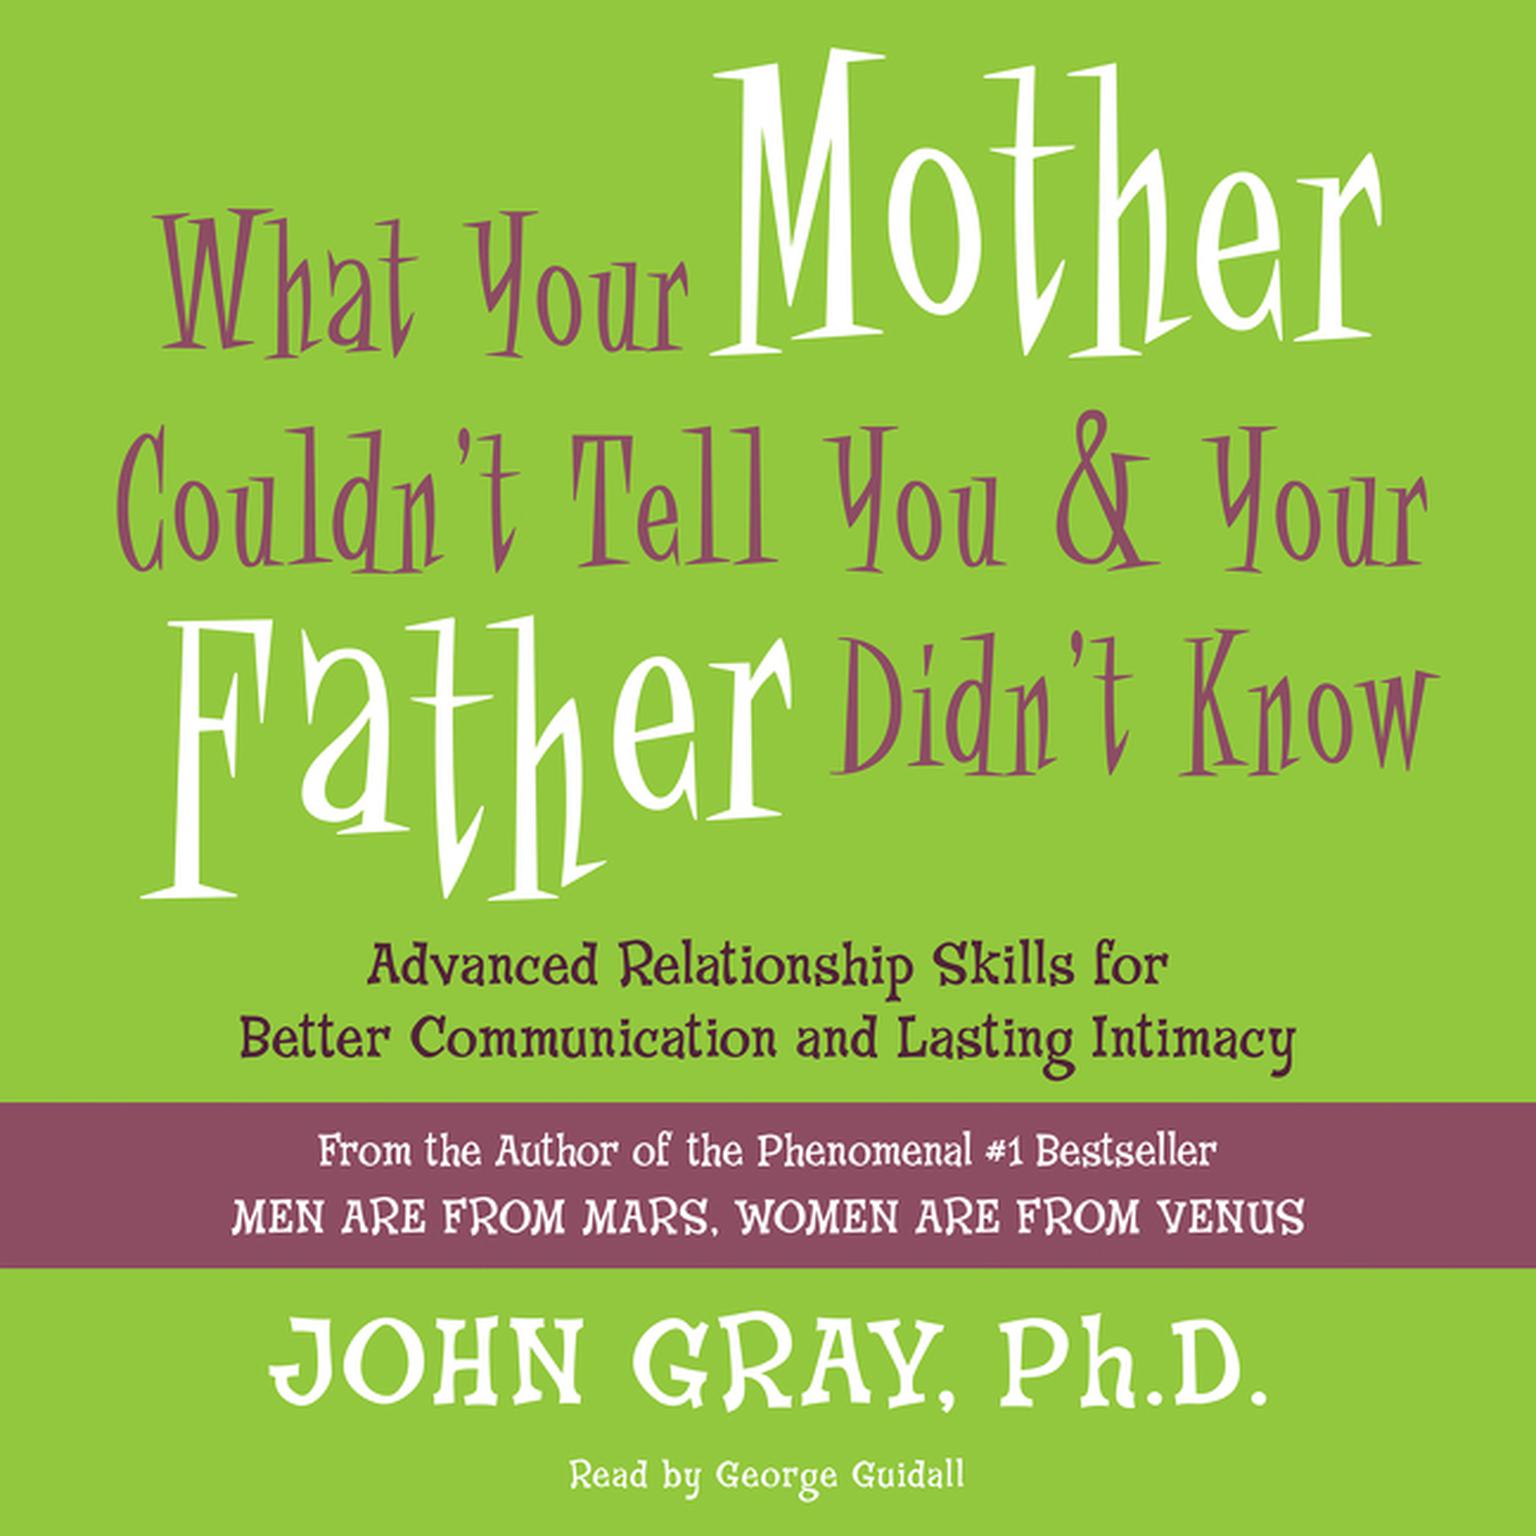 What Your Mother Couldnt Tell You and Your Father Didnt Know: Advanced Relationship Skills for Better Communication and Lasting Intimacy Audiobook, by John Gray